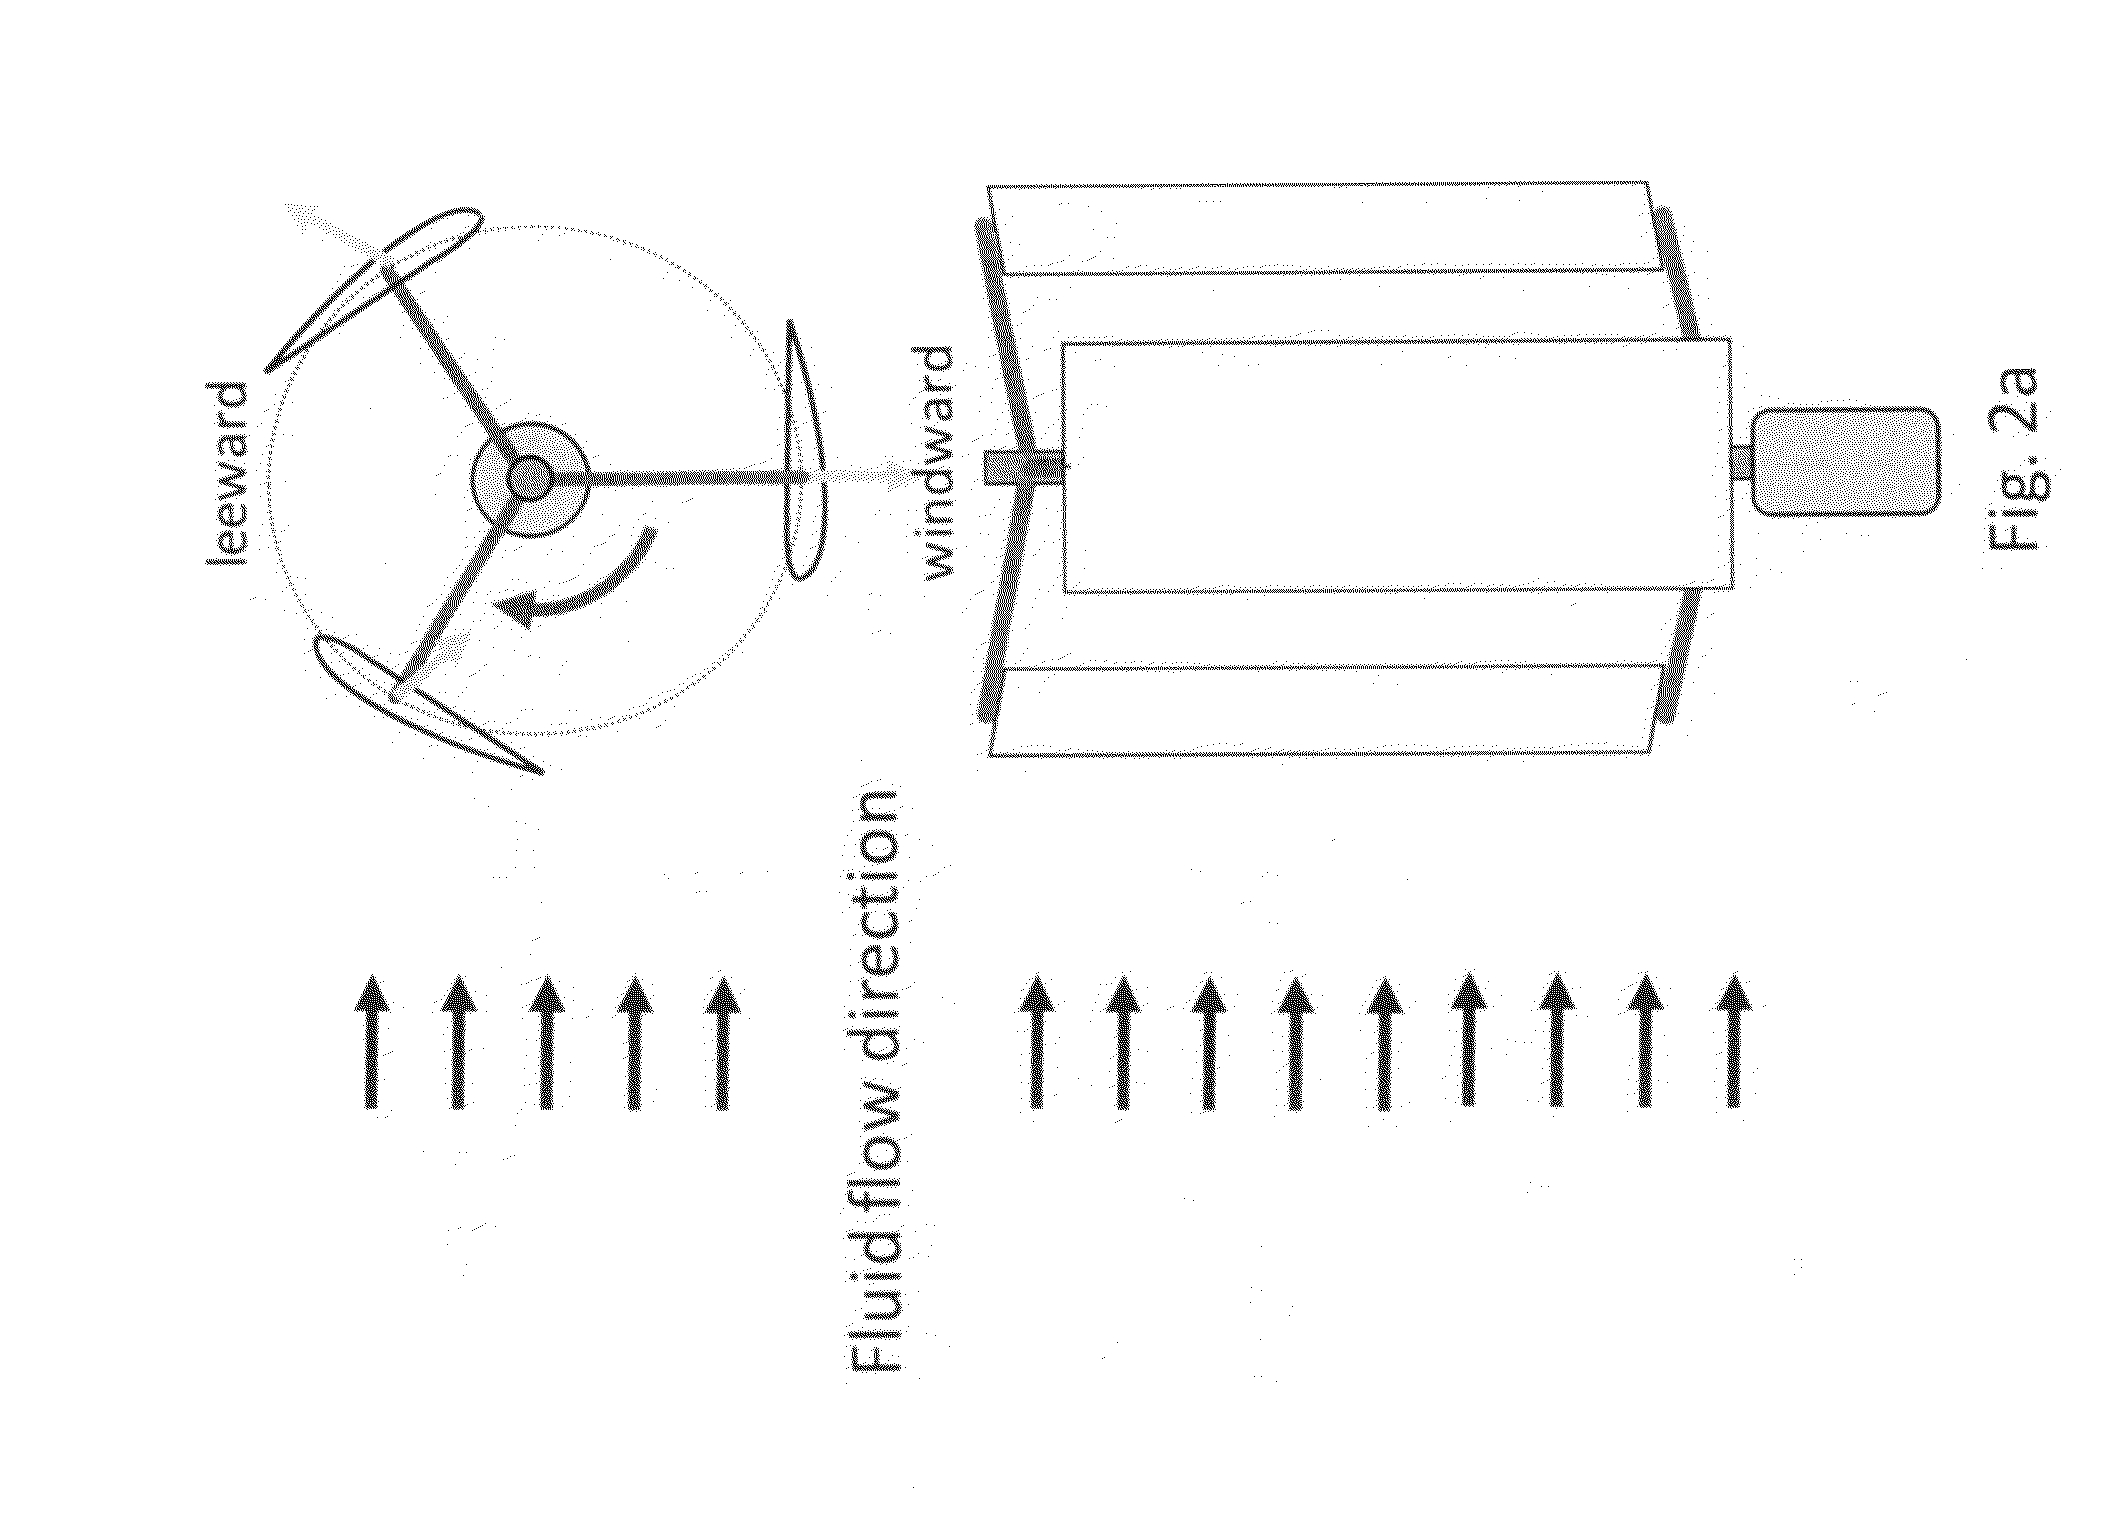 Airfoil blades with self-alignment mechanisms for cross-flow turbines